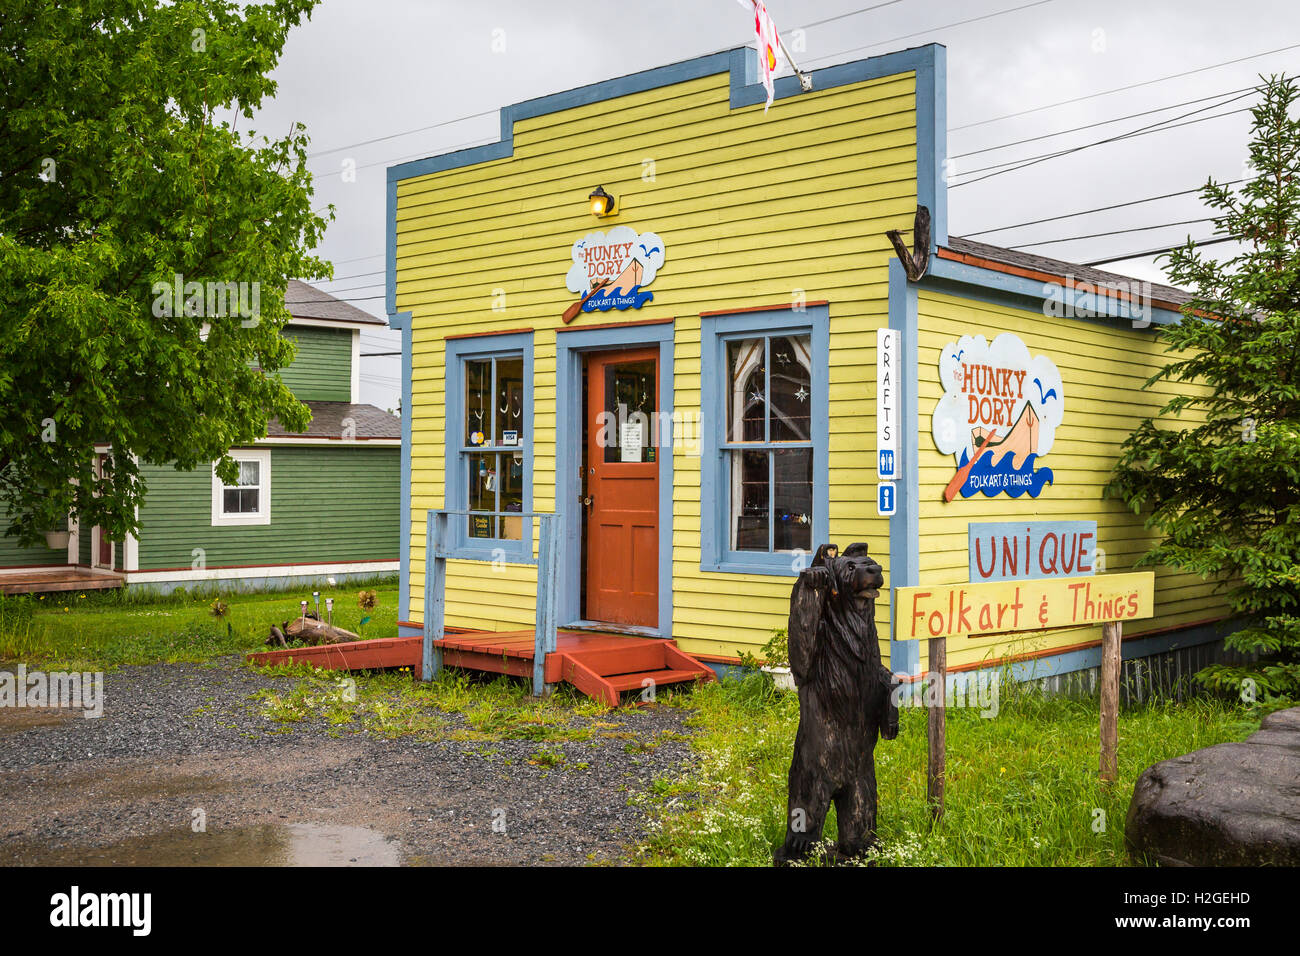 The Hunky Dory gift shop in Woody Point, Newfoundland and Labrador, Canada. Stock Photo